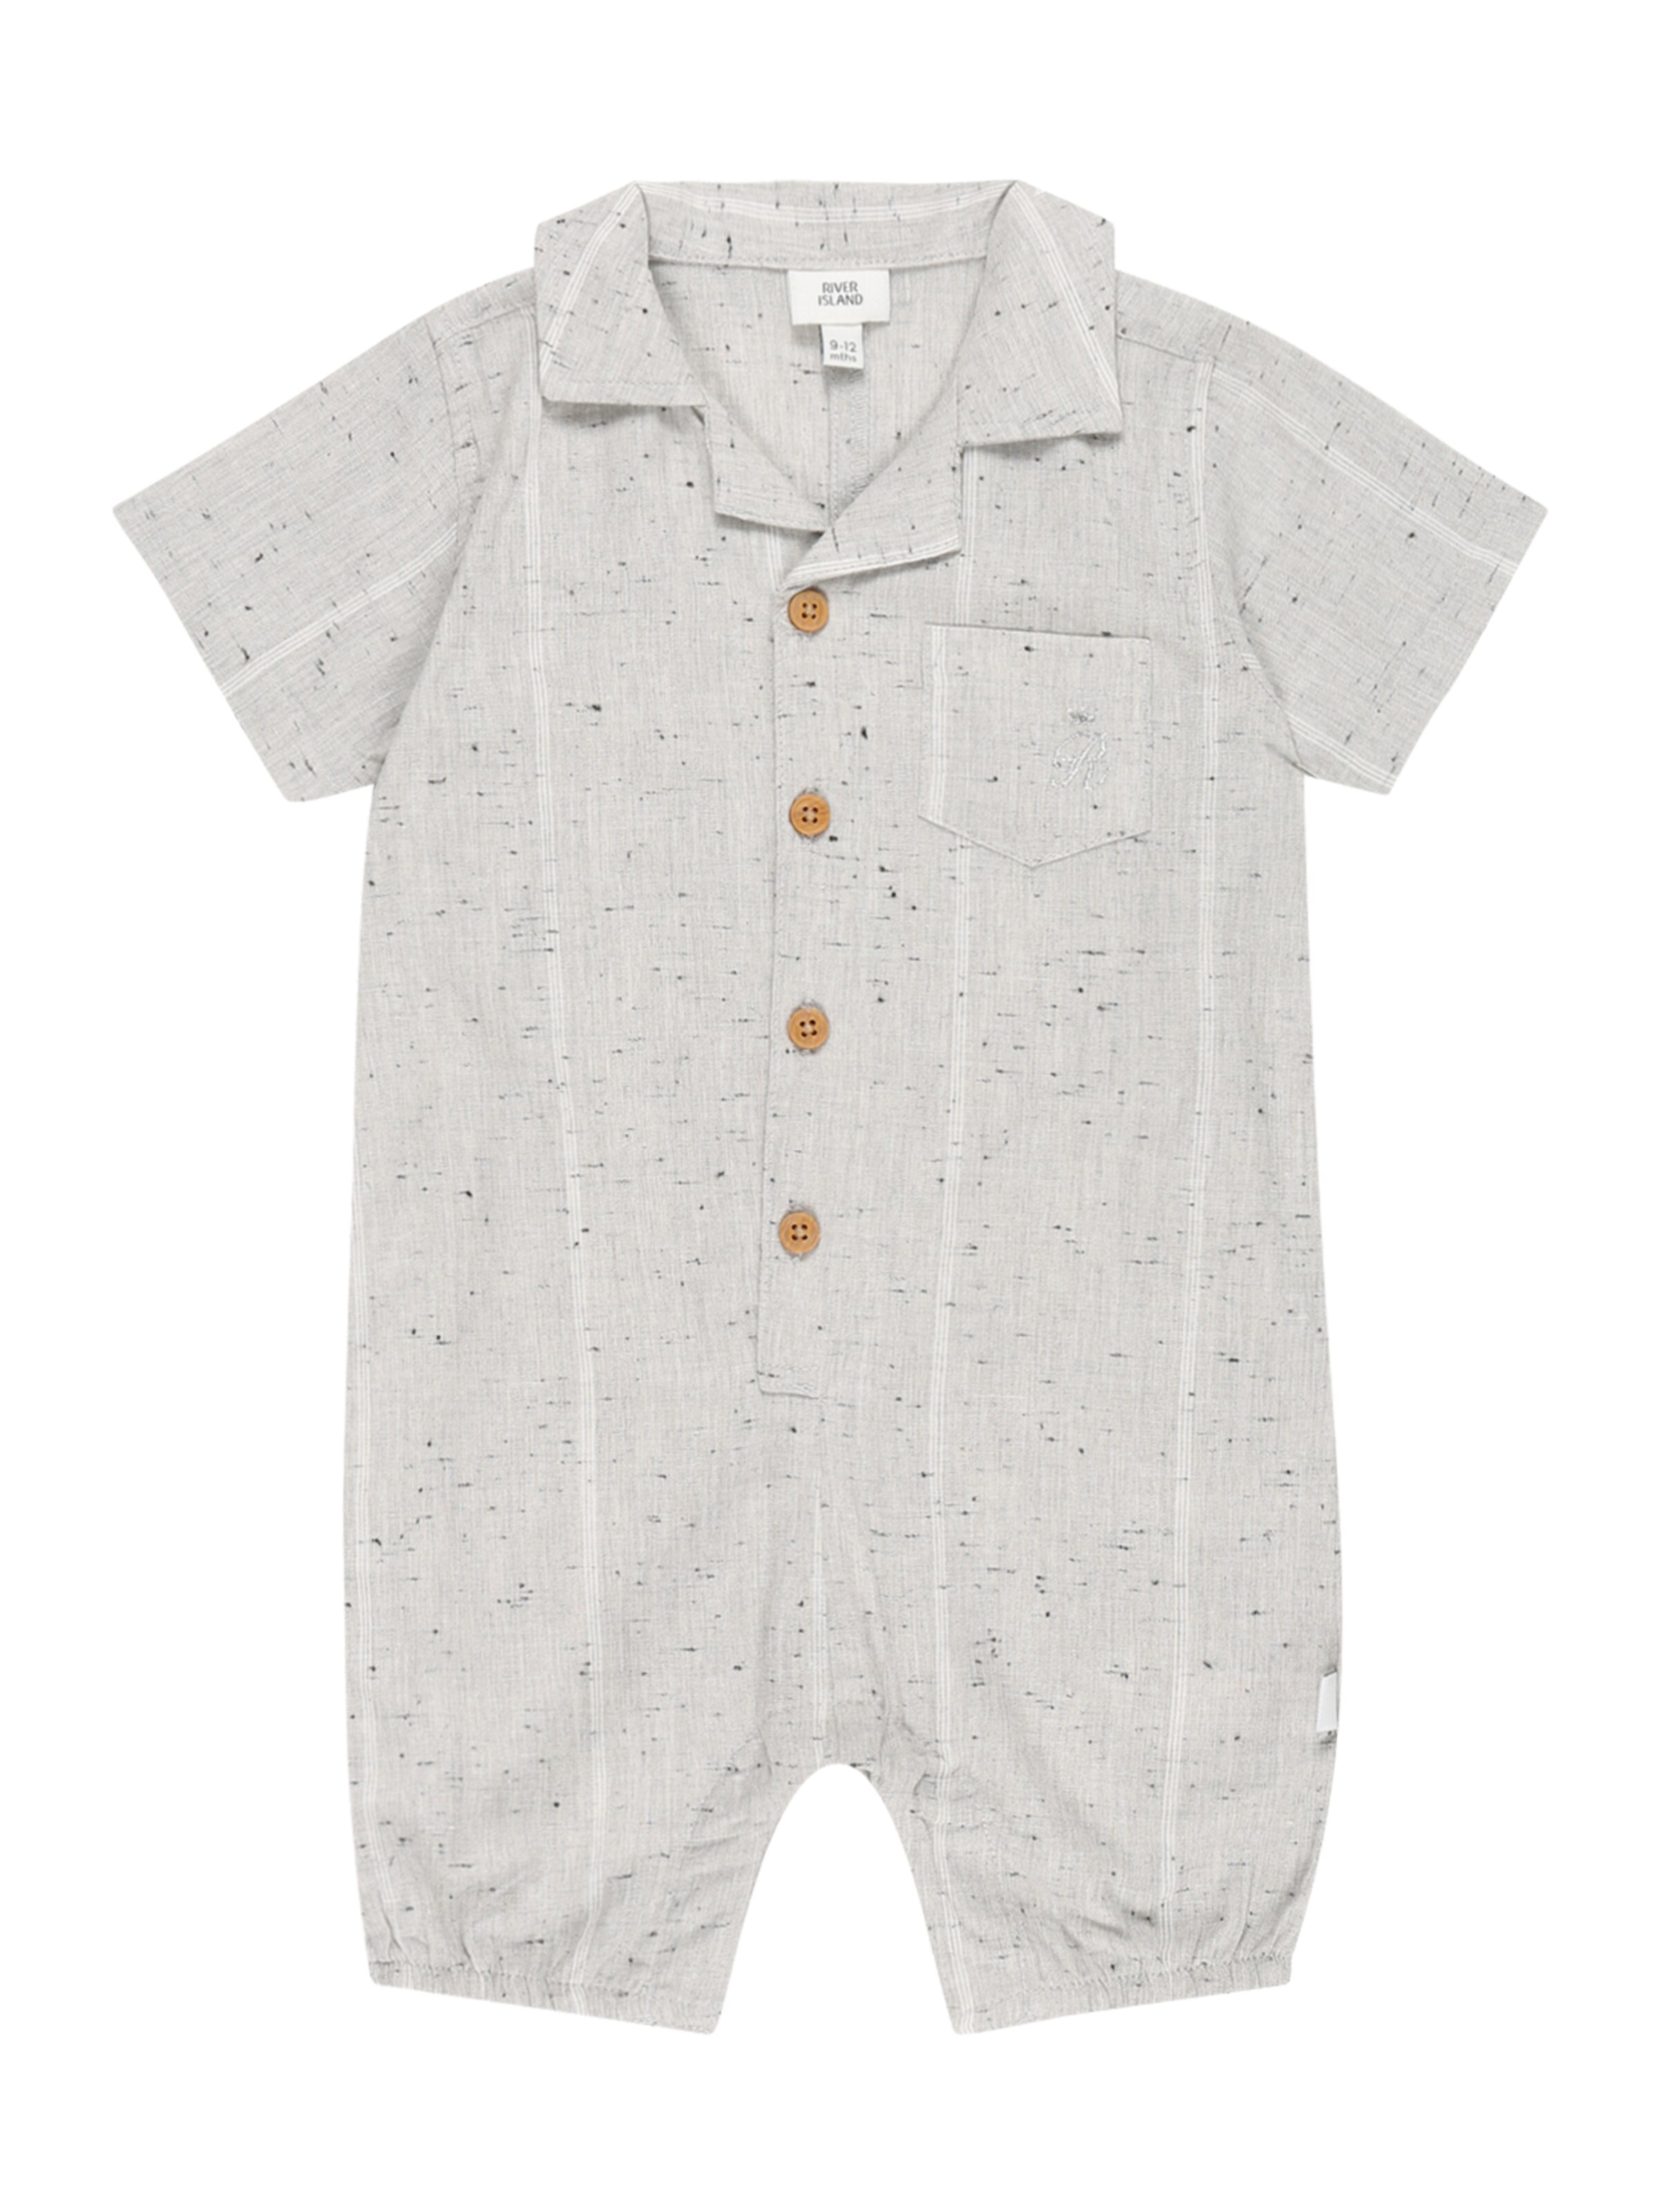 Kinder Bekleidung River Island Overall in Graumeliert - VQ99750